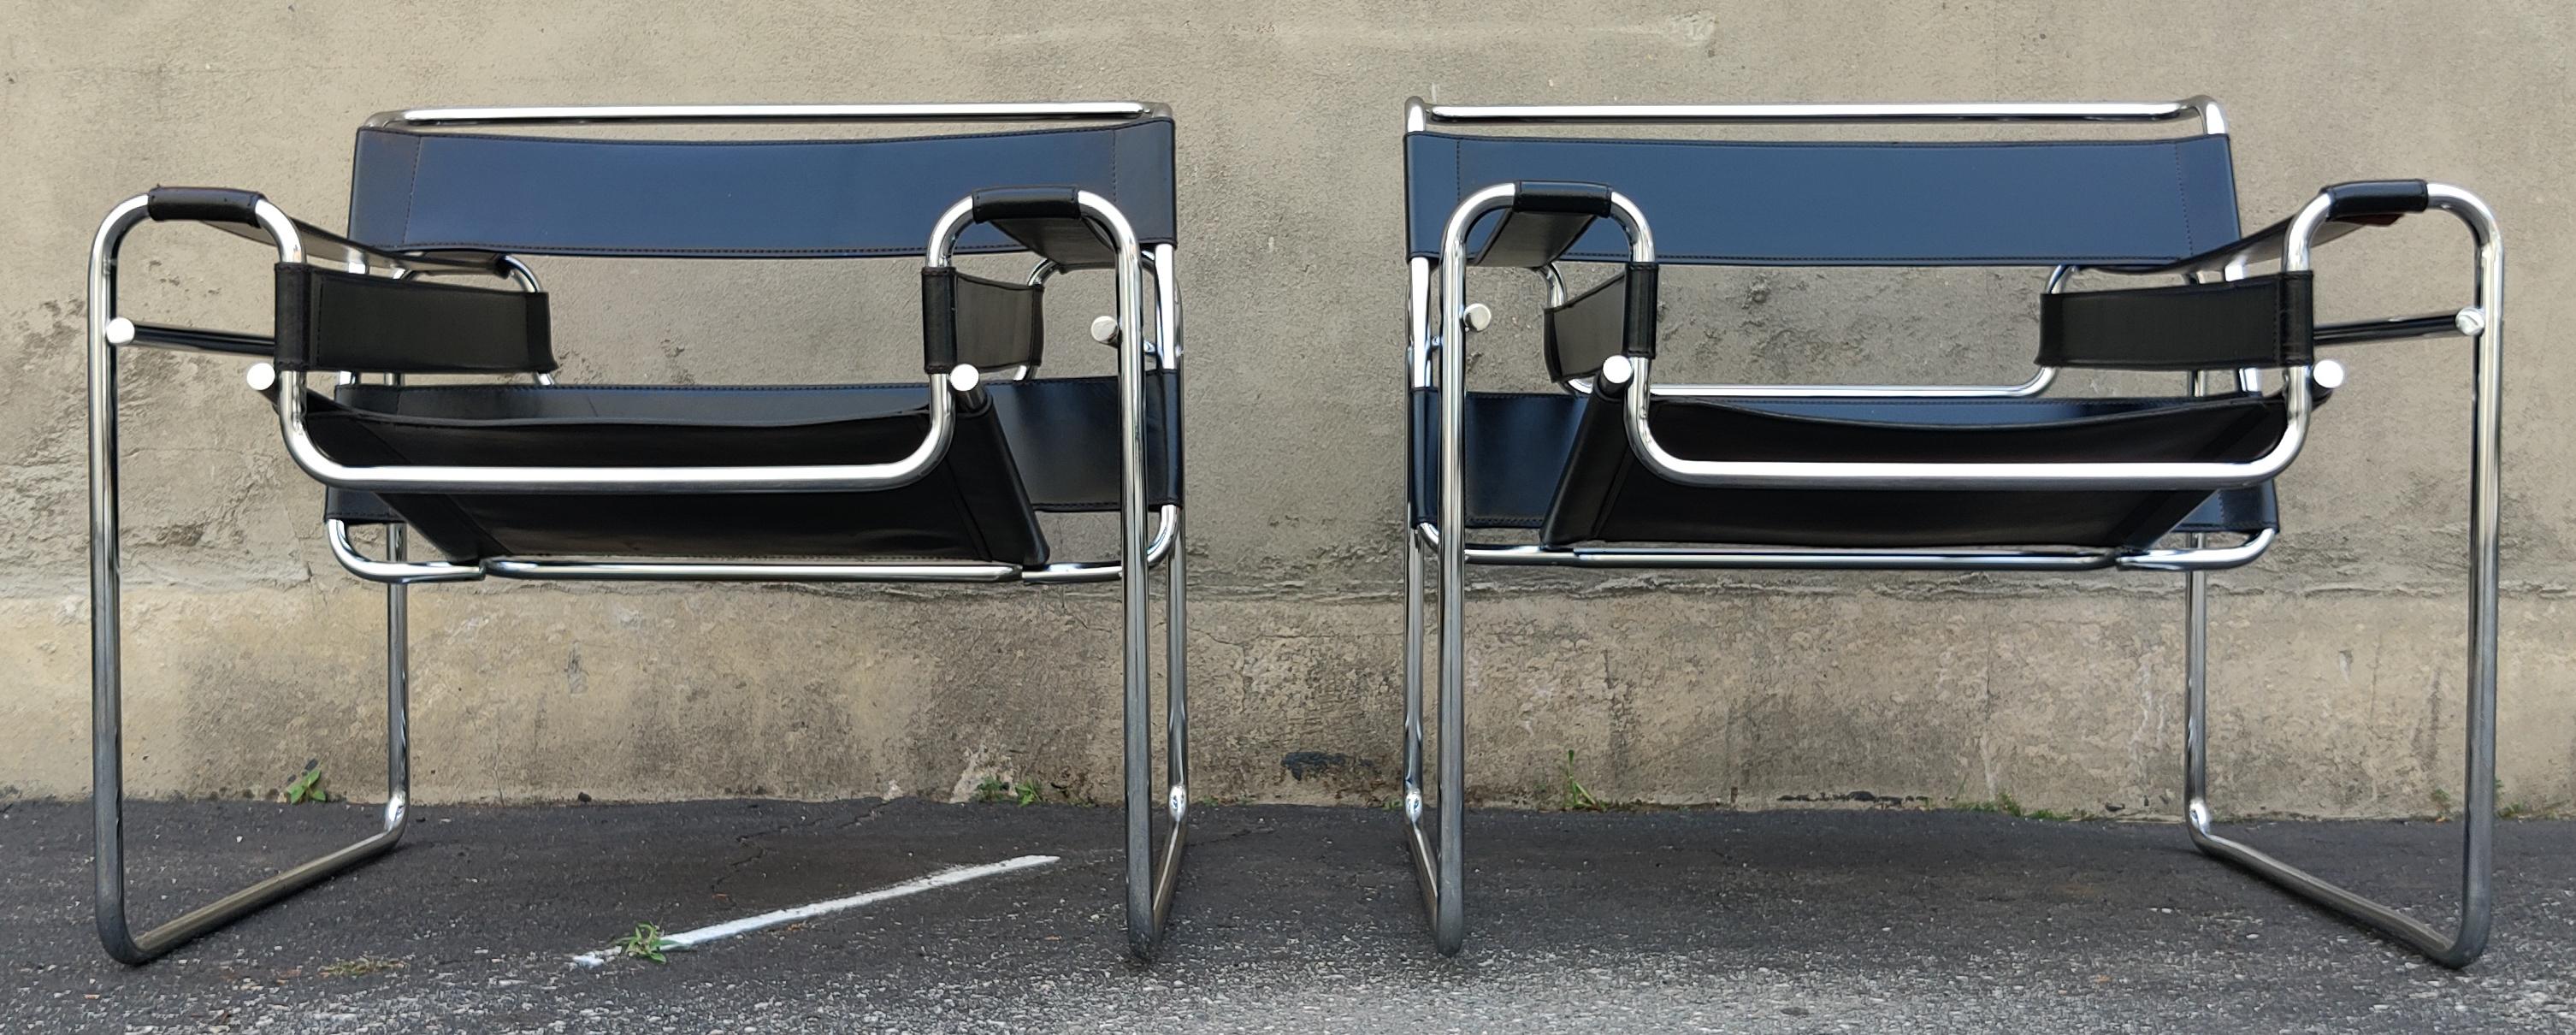 A rare pair of signed Marcel Breuer for Stendig pair of model B3 lounge chairs, also known as Wassily chairs. Originally designed for and named after Bauhaus artist Wassily Kandinsky circa 1926. Constructed of chromed tubular steel and stitched